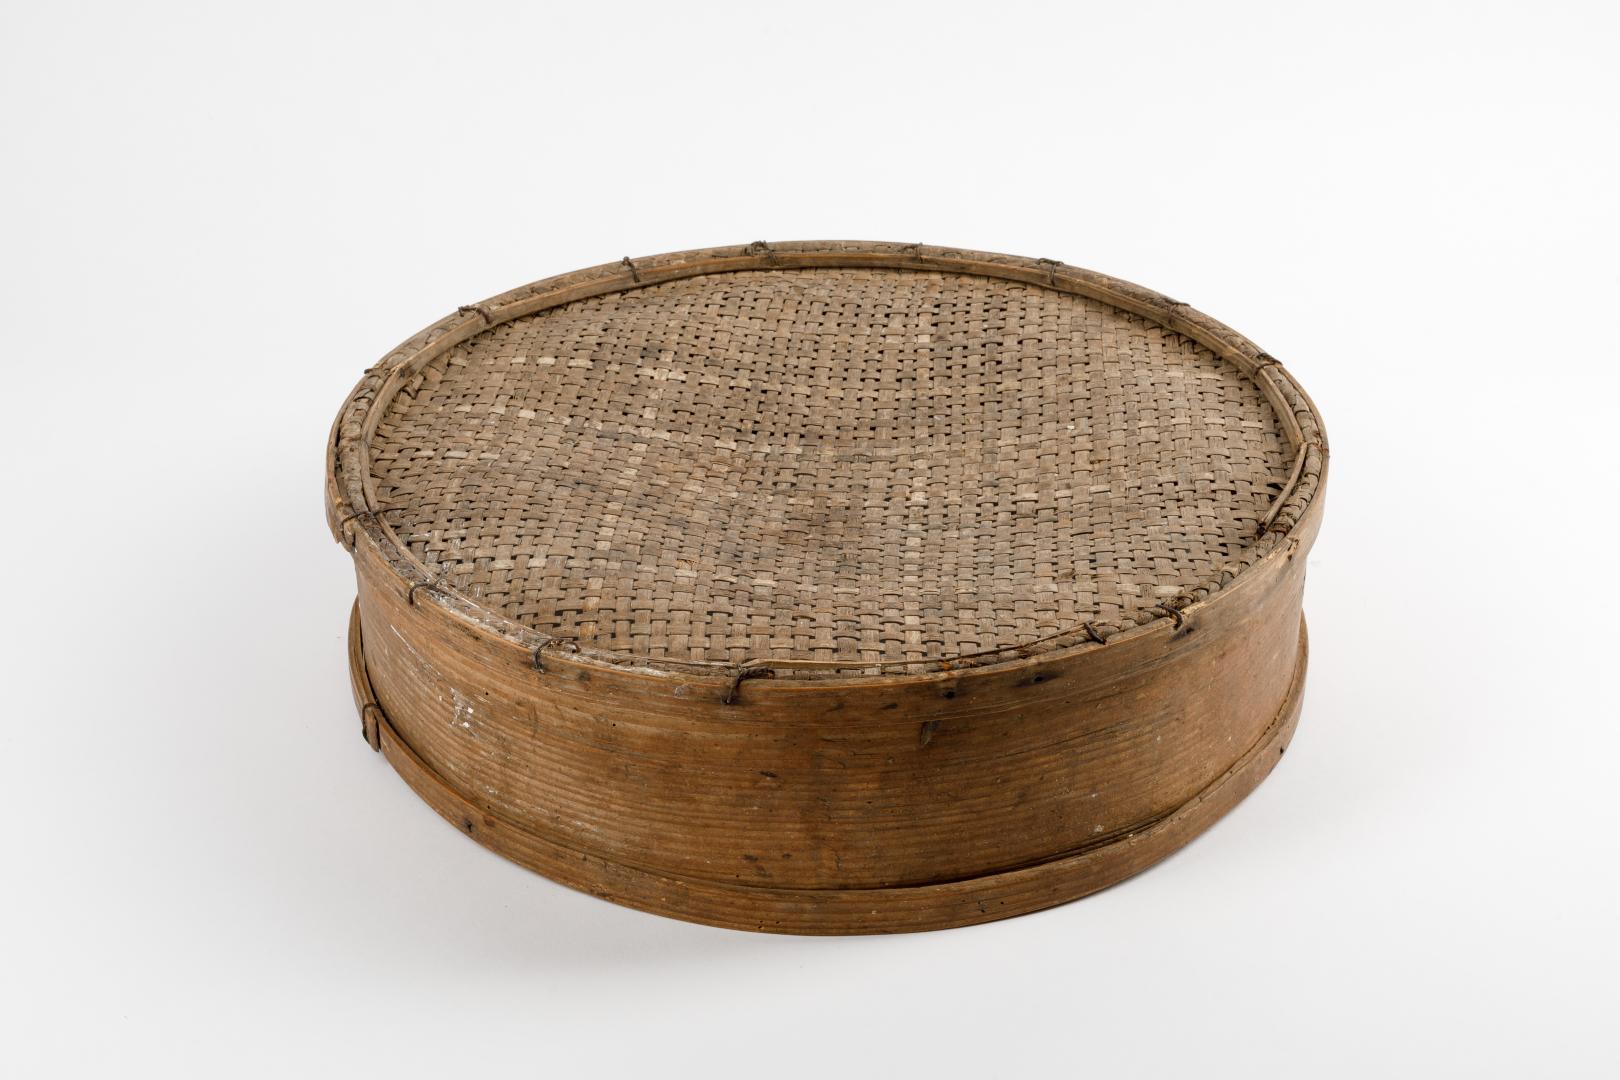 Small sieve typically with a handle